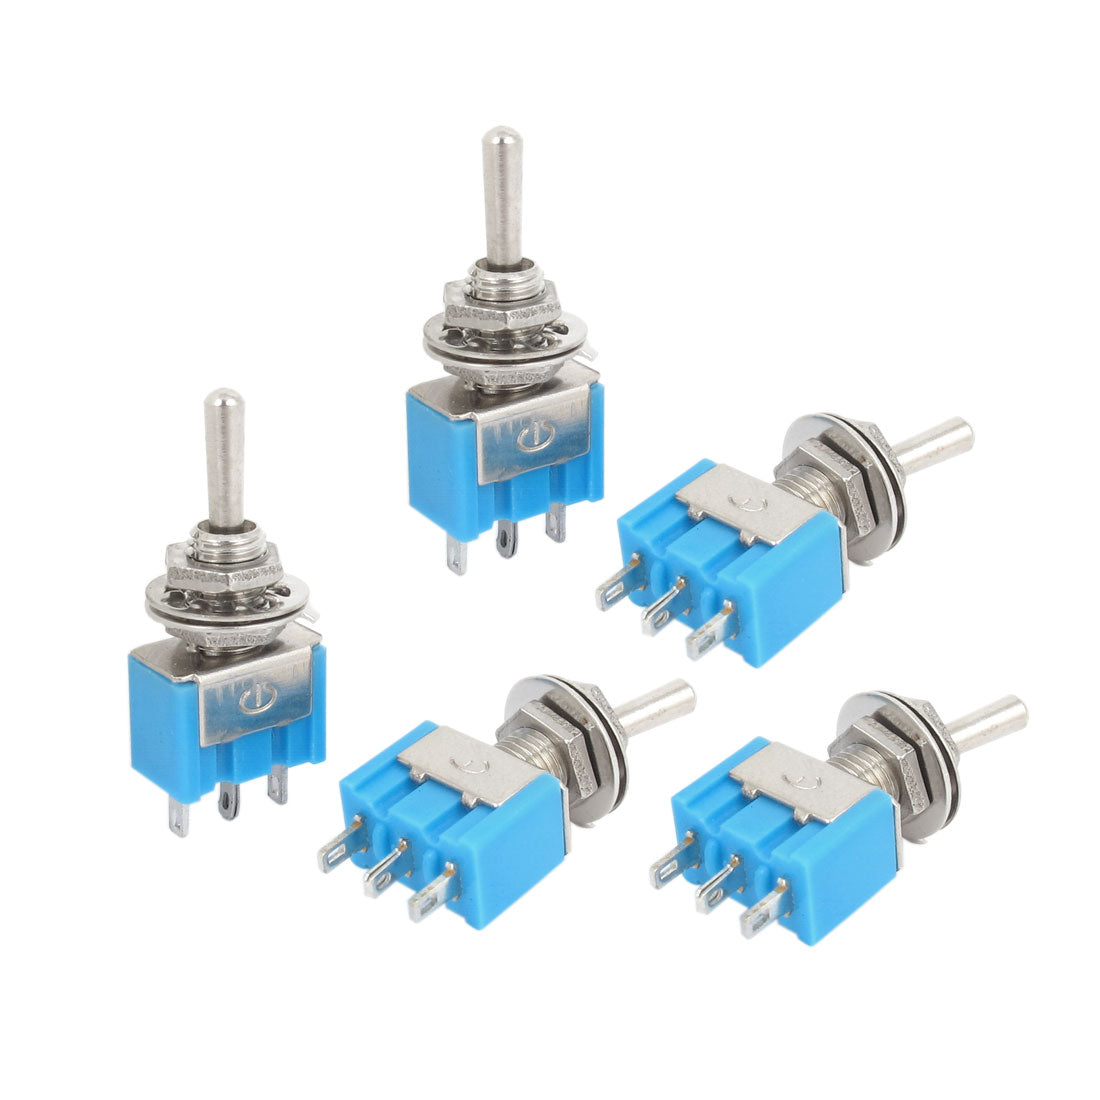 uxcell Uxcell 5pcs AC 125V 6A ON/OFF/ON 3-Position SPDT 3 Terminals Mini Latching Toggle Switch